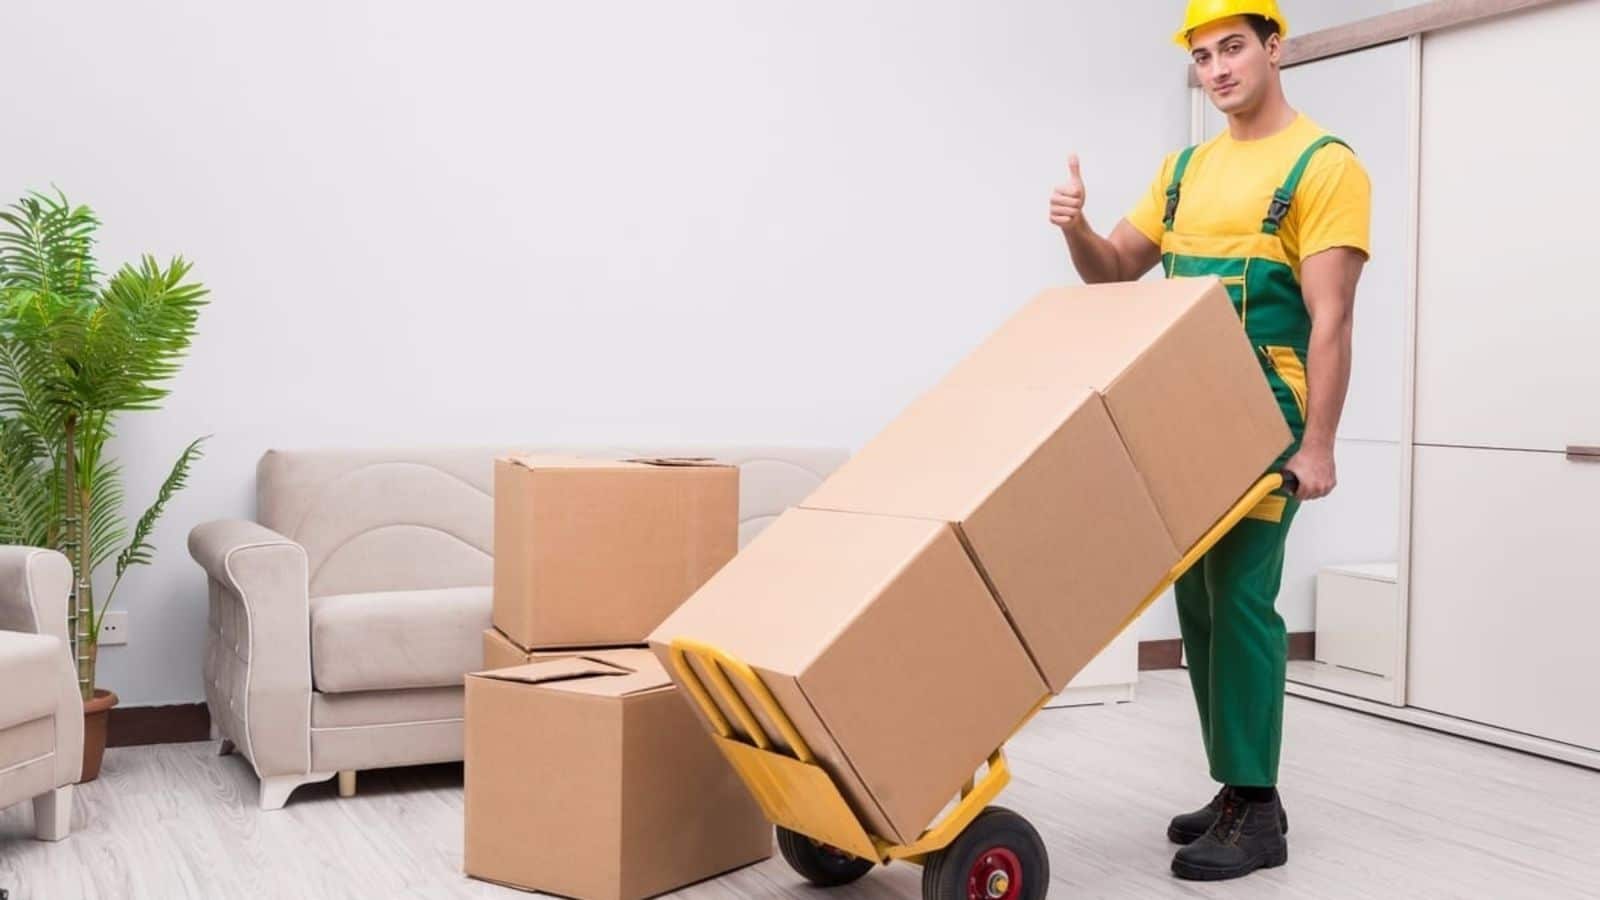 Packers and Movers – Best Way to Relocate Your Office Furniture Or Household Items